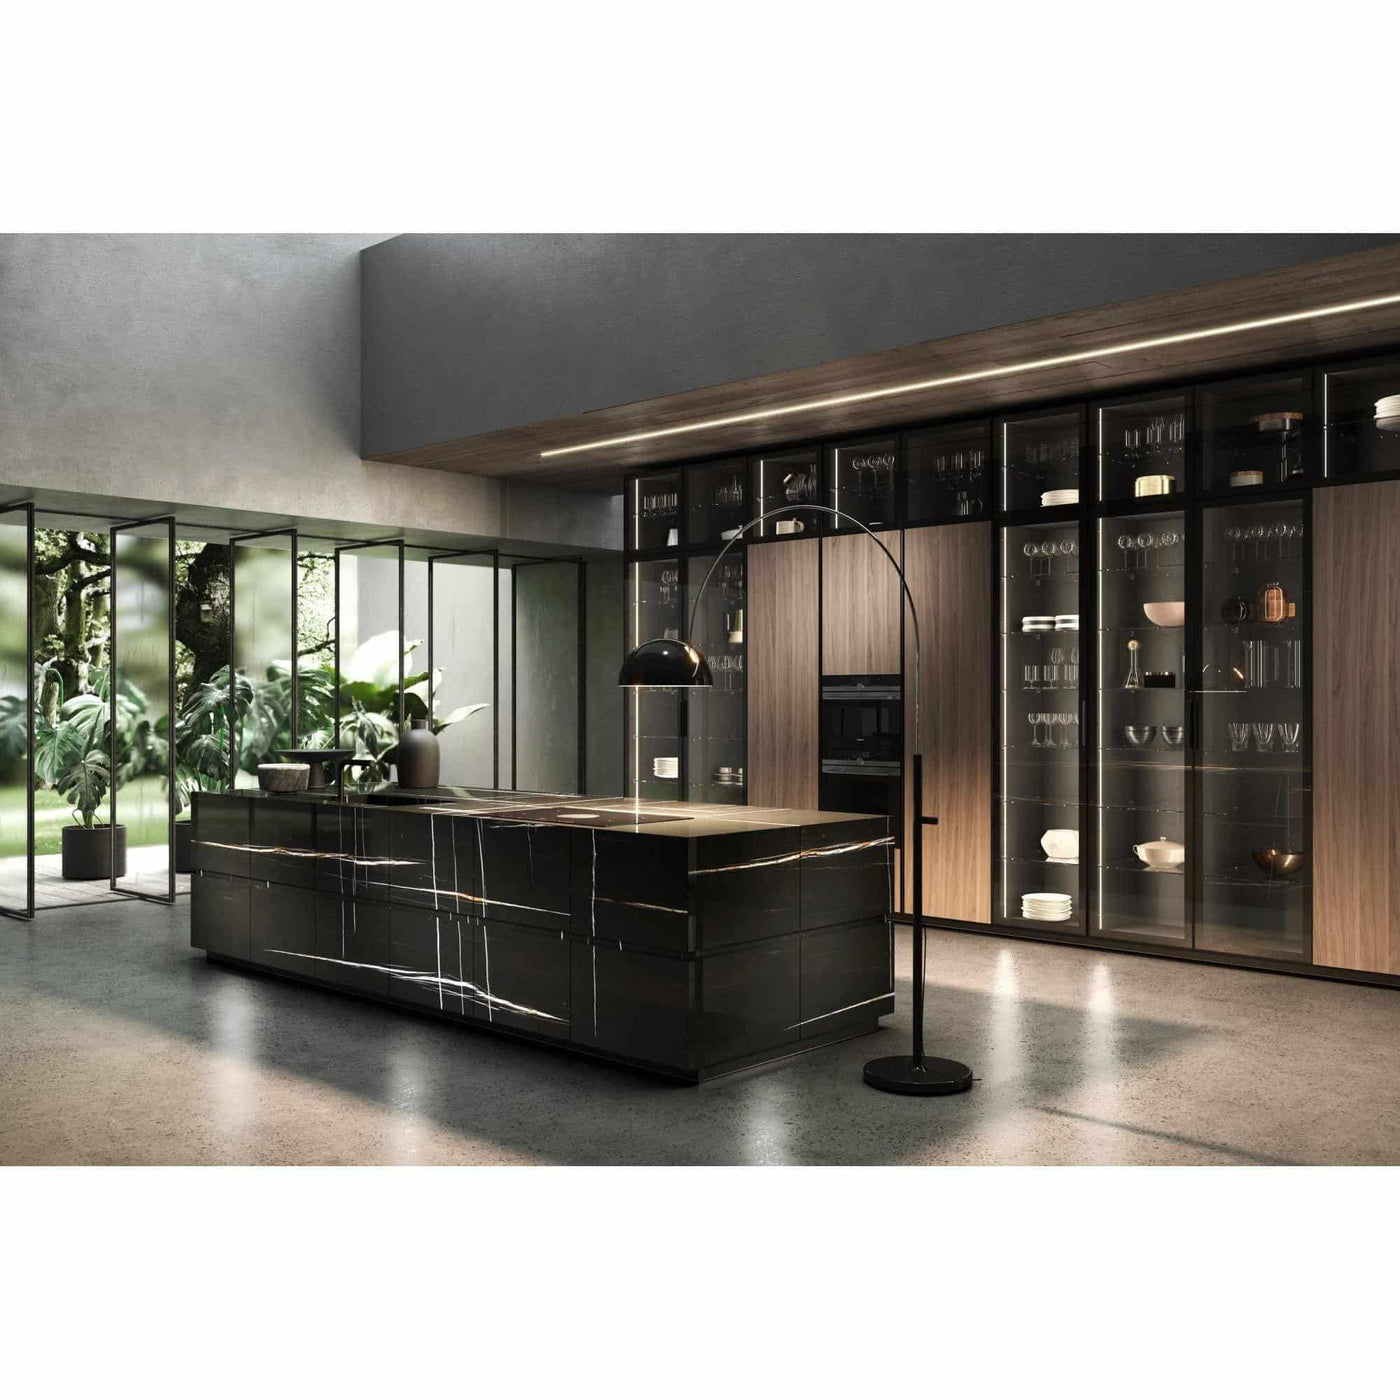 Haji Gallery,ASTER,ASTER Contempora Customized Kitchens,Kitchens.